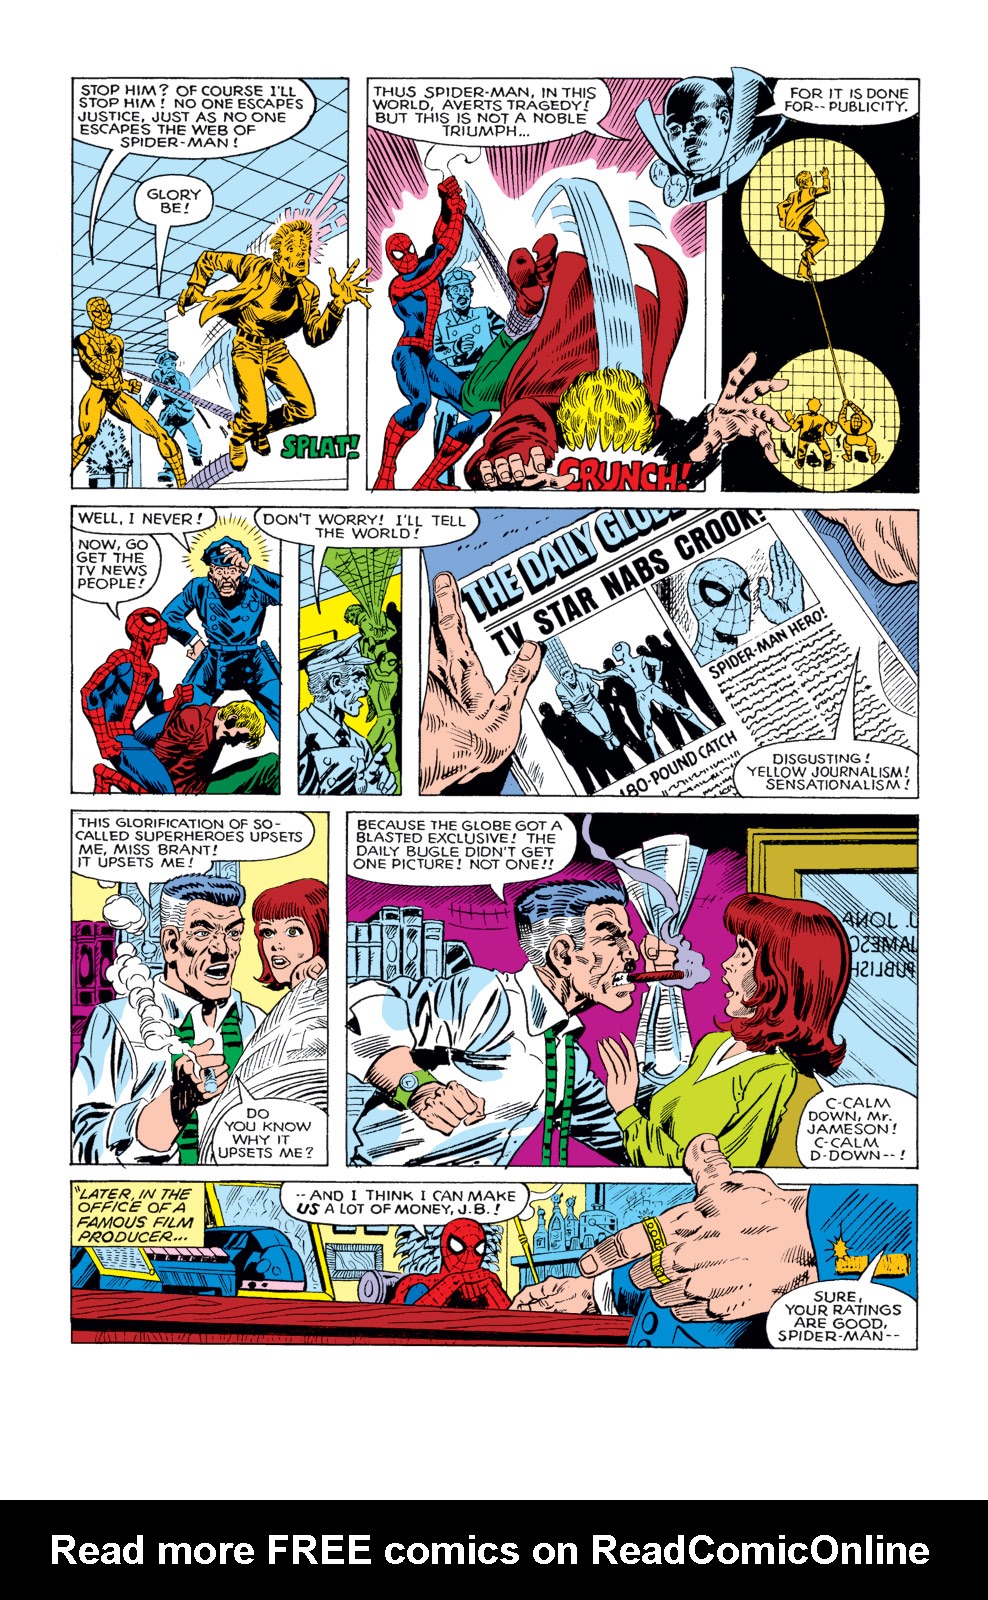 What If? (1977) issue 19 - Spider-Man had never become a crimefighter - Page 5